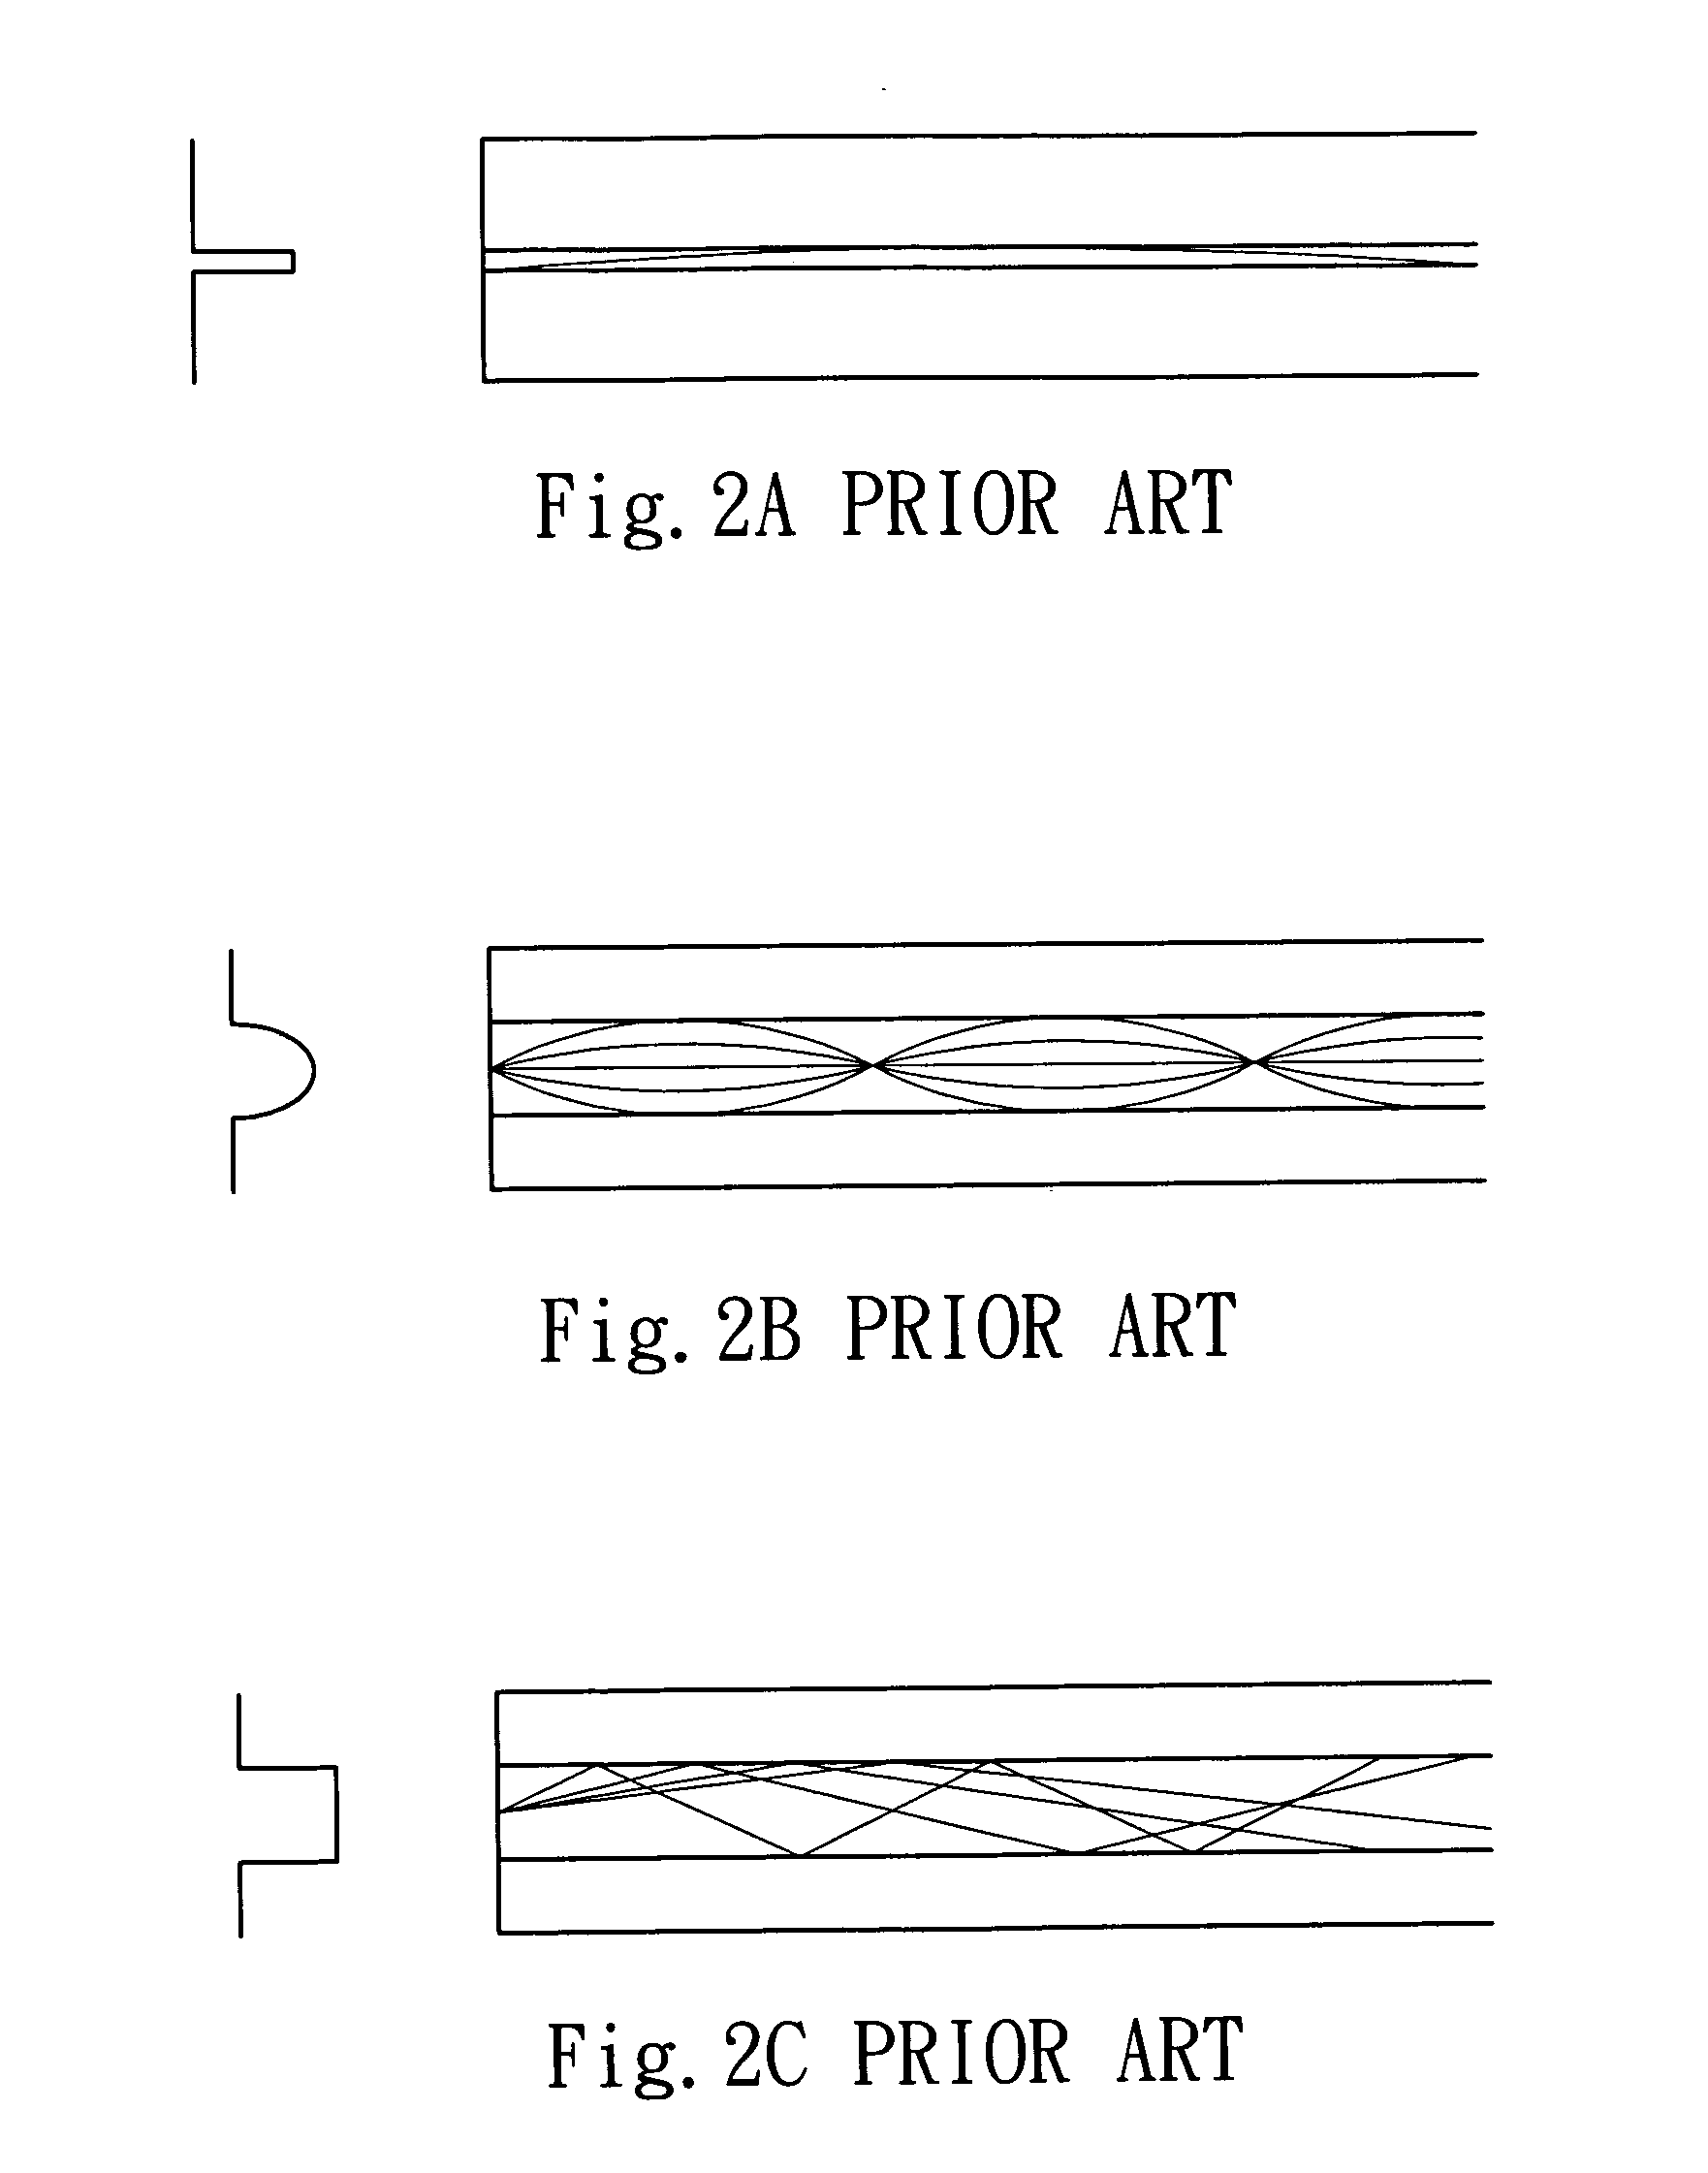 Coaxial light-guide system consisting of coaxial light-guide fiber basing its refractive index profiles on radii and with its coaxial both semiconductor light sources and semiconductor detectors